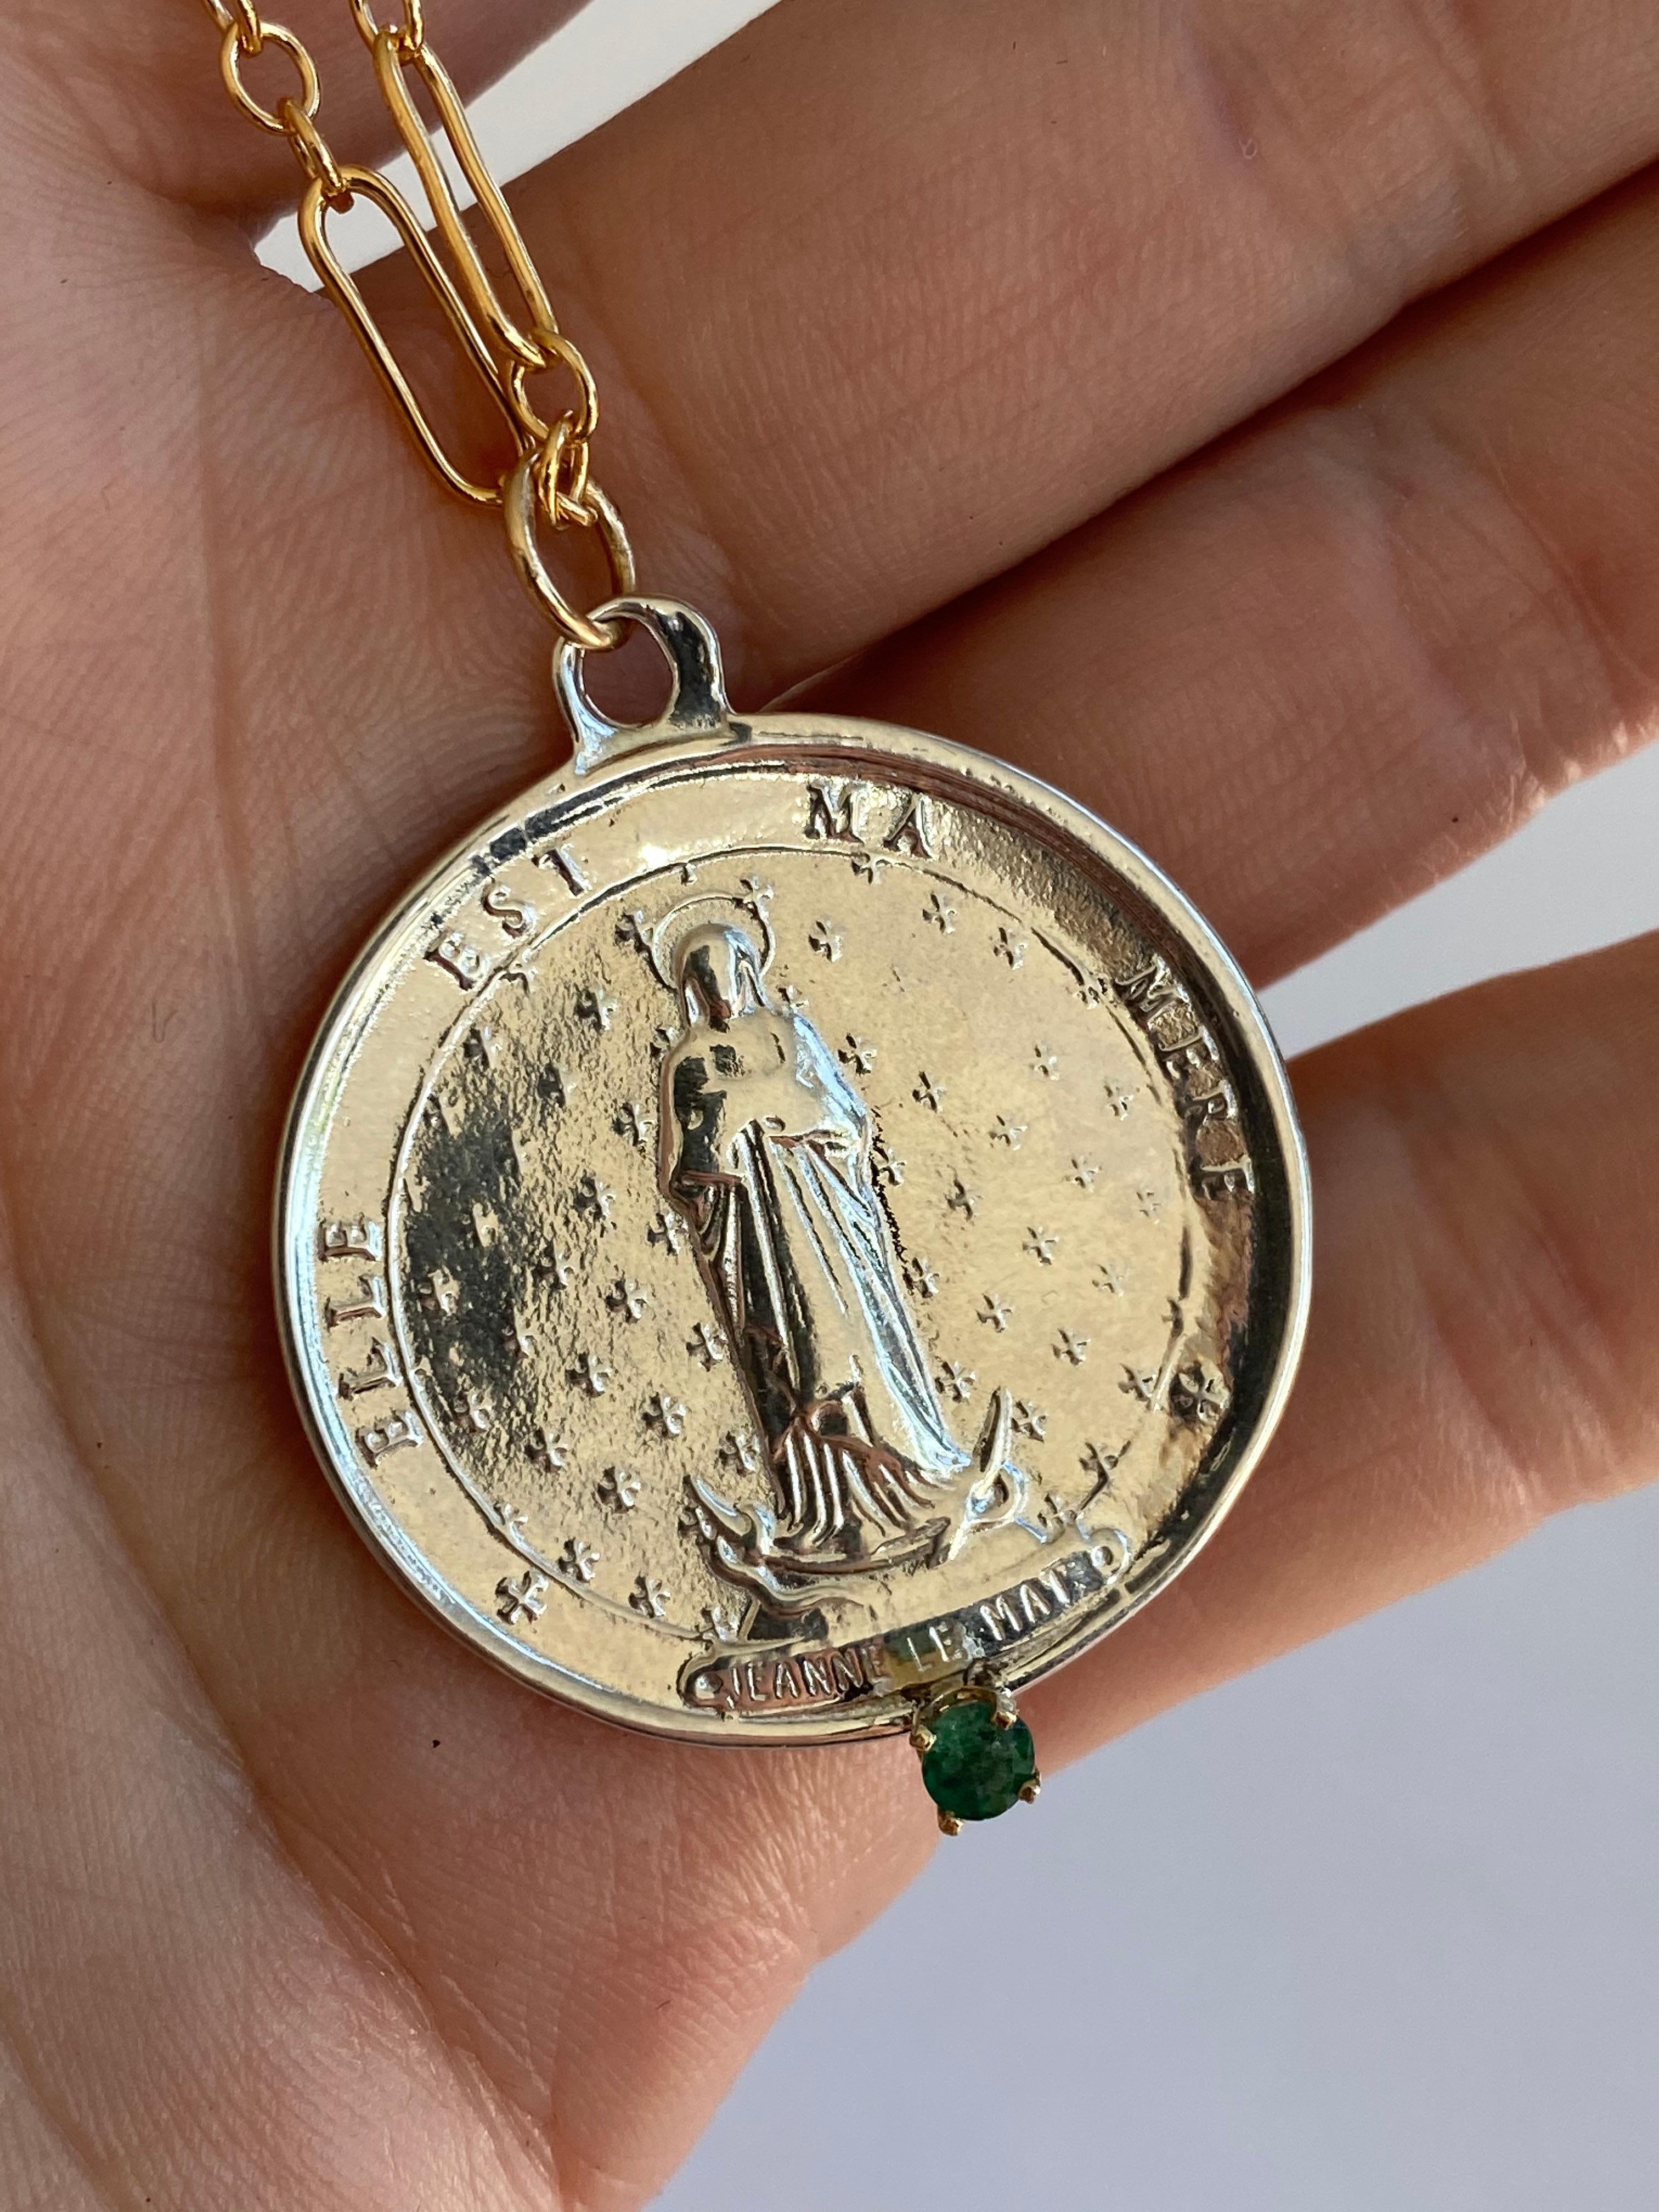 Emerald Saint Medal Coin Silver Jeanne Le Mat Necklace Gold Filled Chain J Dauphin

Exclusive piece with a Round Silver Medal Coin with French Saint Jeanne Le Mat and an Emerald set in a Gold prong hanging on a gold filled Chain. Necklace is 28